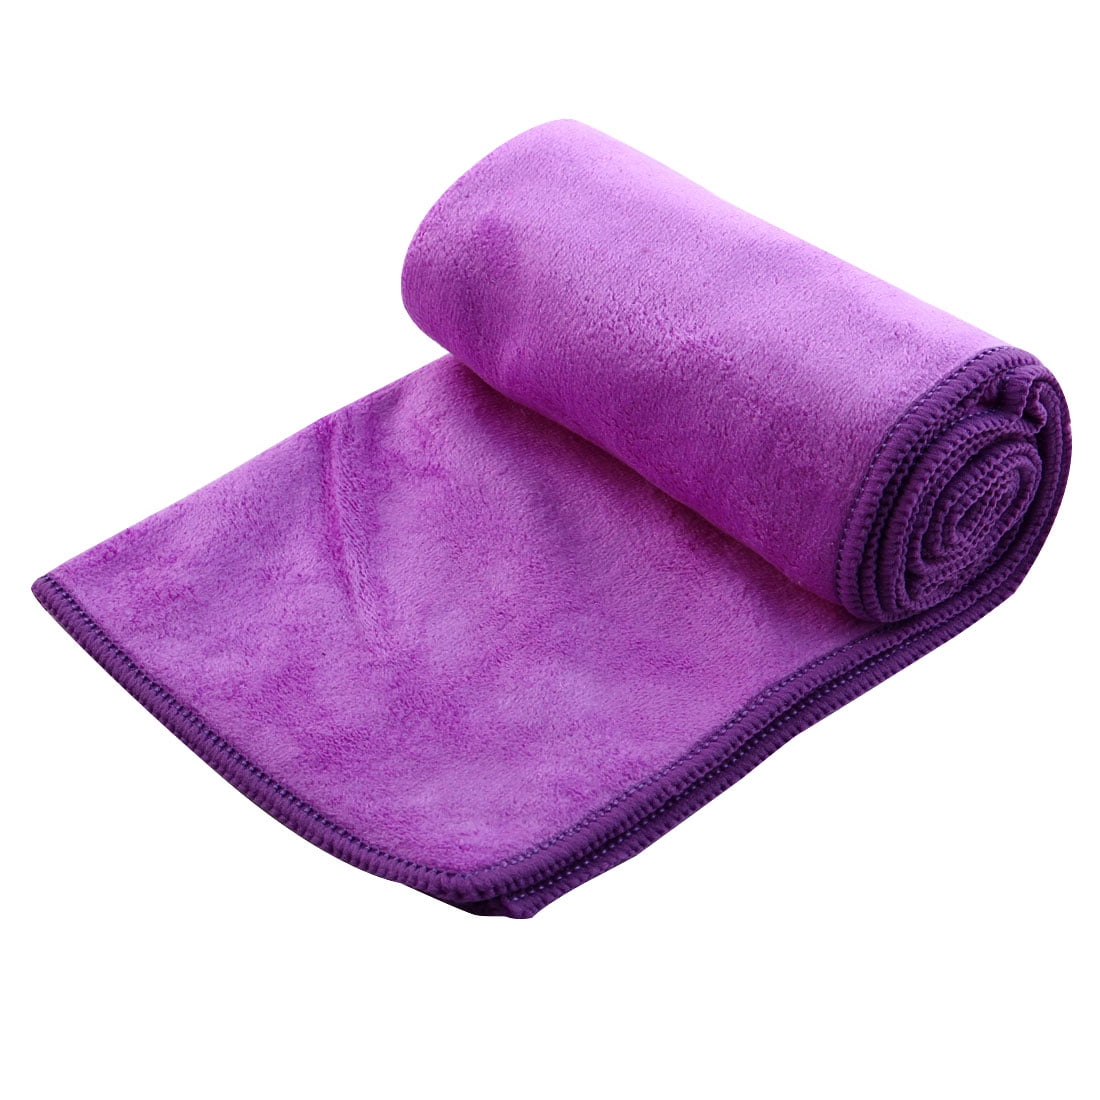 Soft Microfiber Absorbent Water Quick-Drying Towels Travel Beach Bath Body Towel